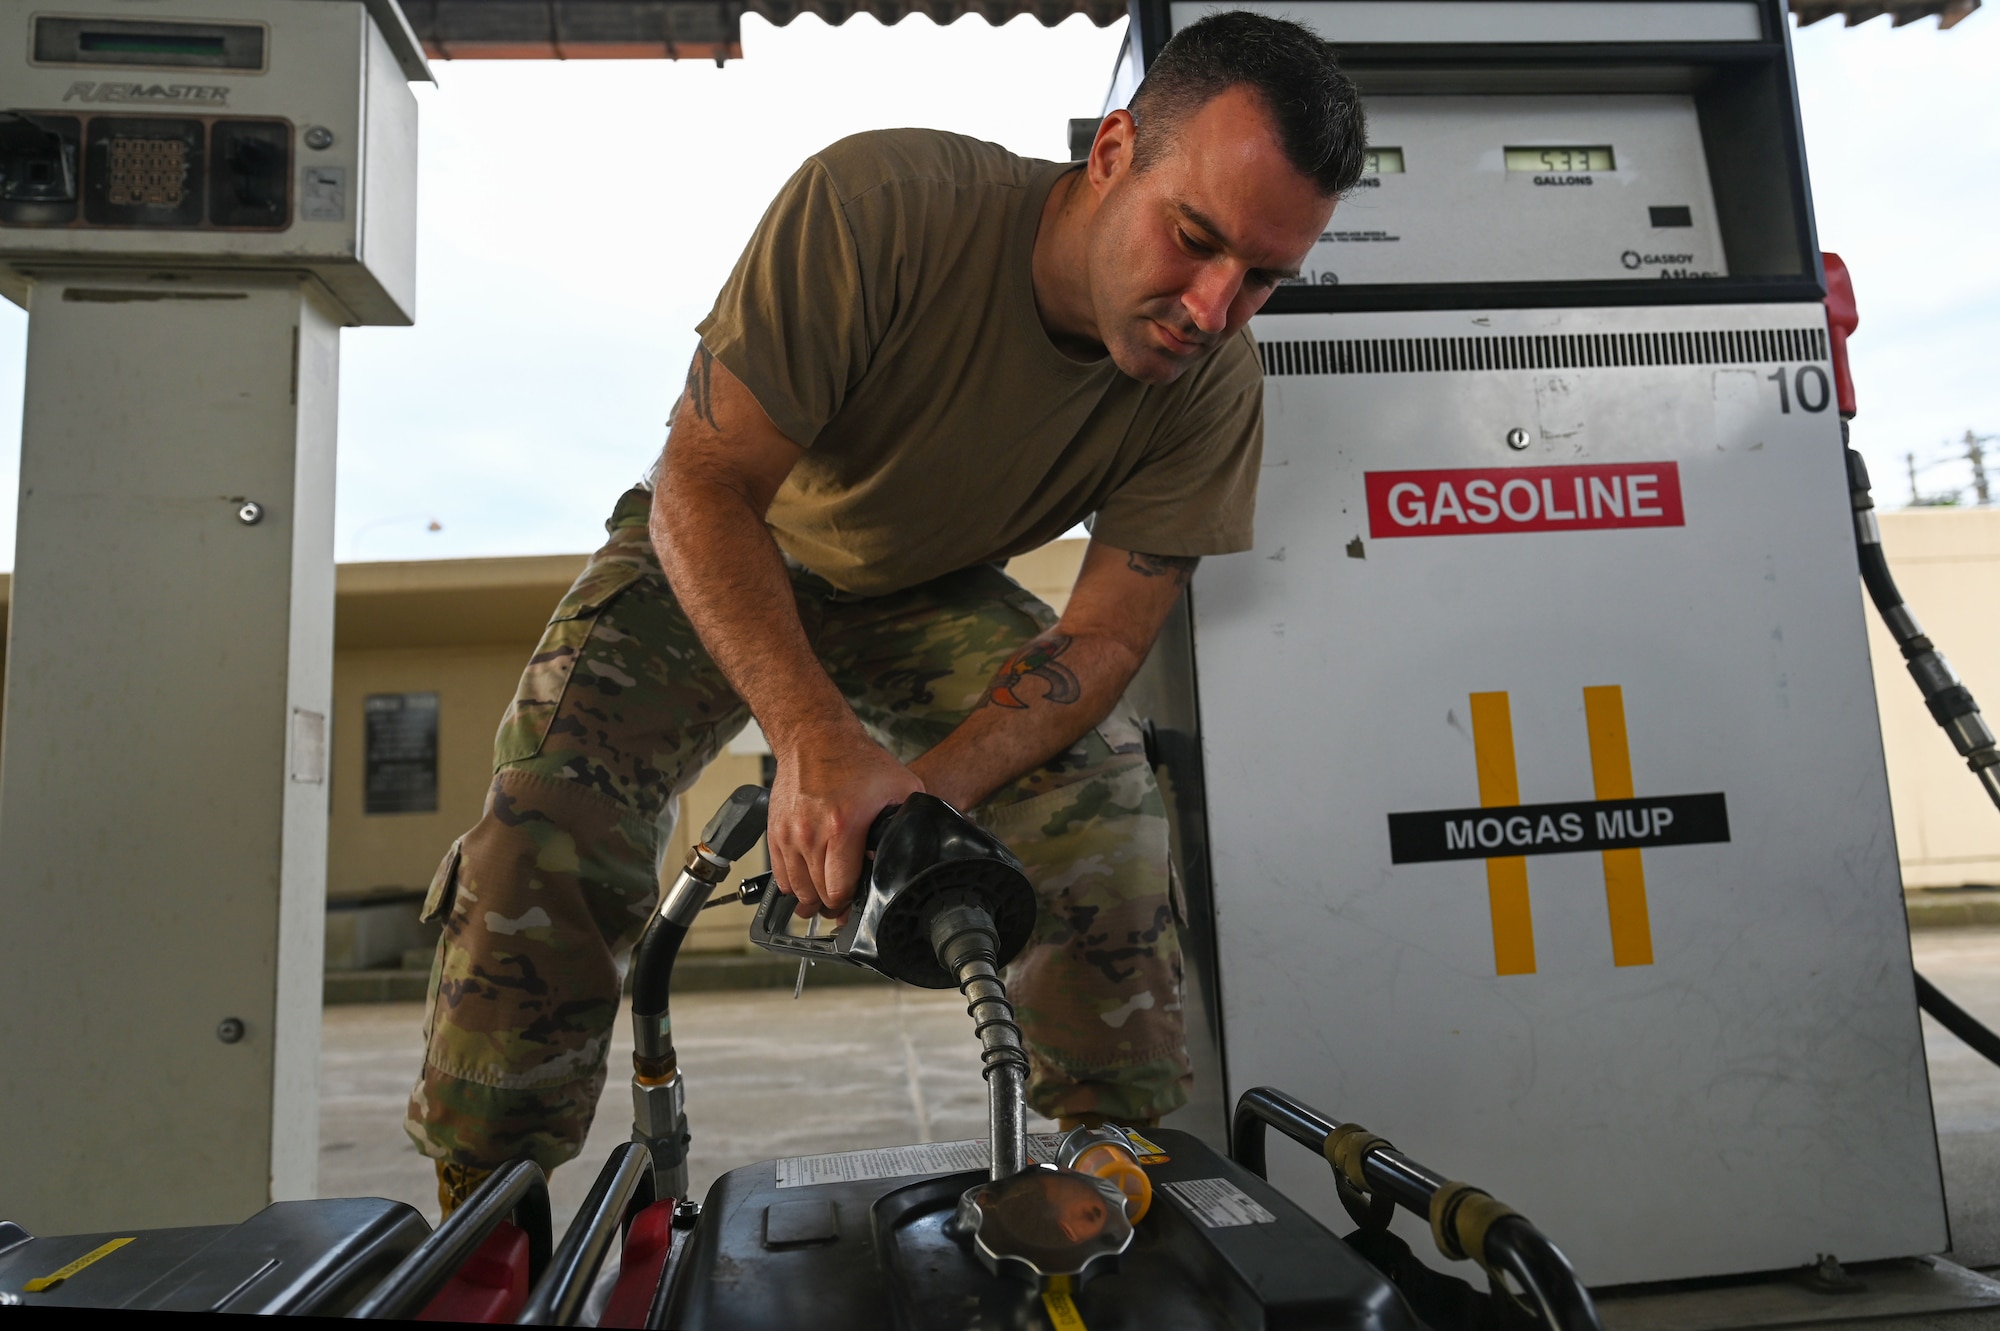 U.S. Air Force Master Sgt. Jeremiah S. Johnson, 87th Electronic Warfare Squadron Combat Shield flight chief, fills two generators to power equipment to assess the electronic warfare (EW) defensive system readiness of U.S Air Force F-16 Fighting Falcons at Misawa Air Base, Japan, Aug. 9, 2023. Combat Shield ensures U.S. Air Force air assets at Misawa AB have EW combat readiness and are effective to support a free and open Indo-Pacific. (U.S. Air Force photo by Staff Sgt. Ericka A. Woolever)